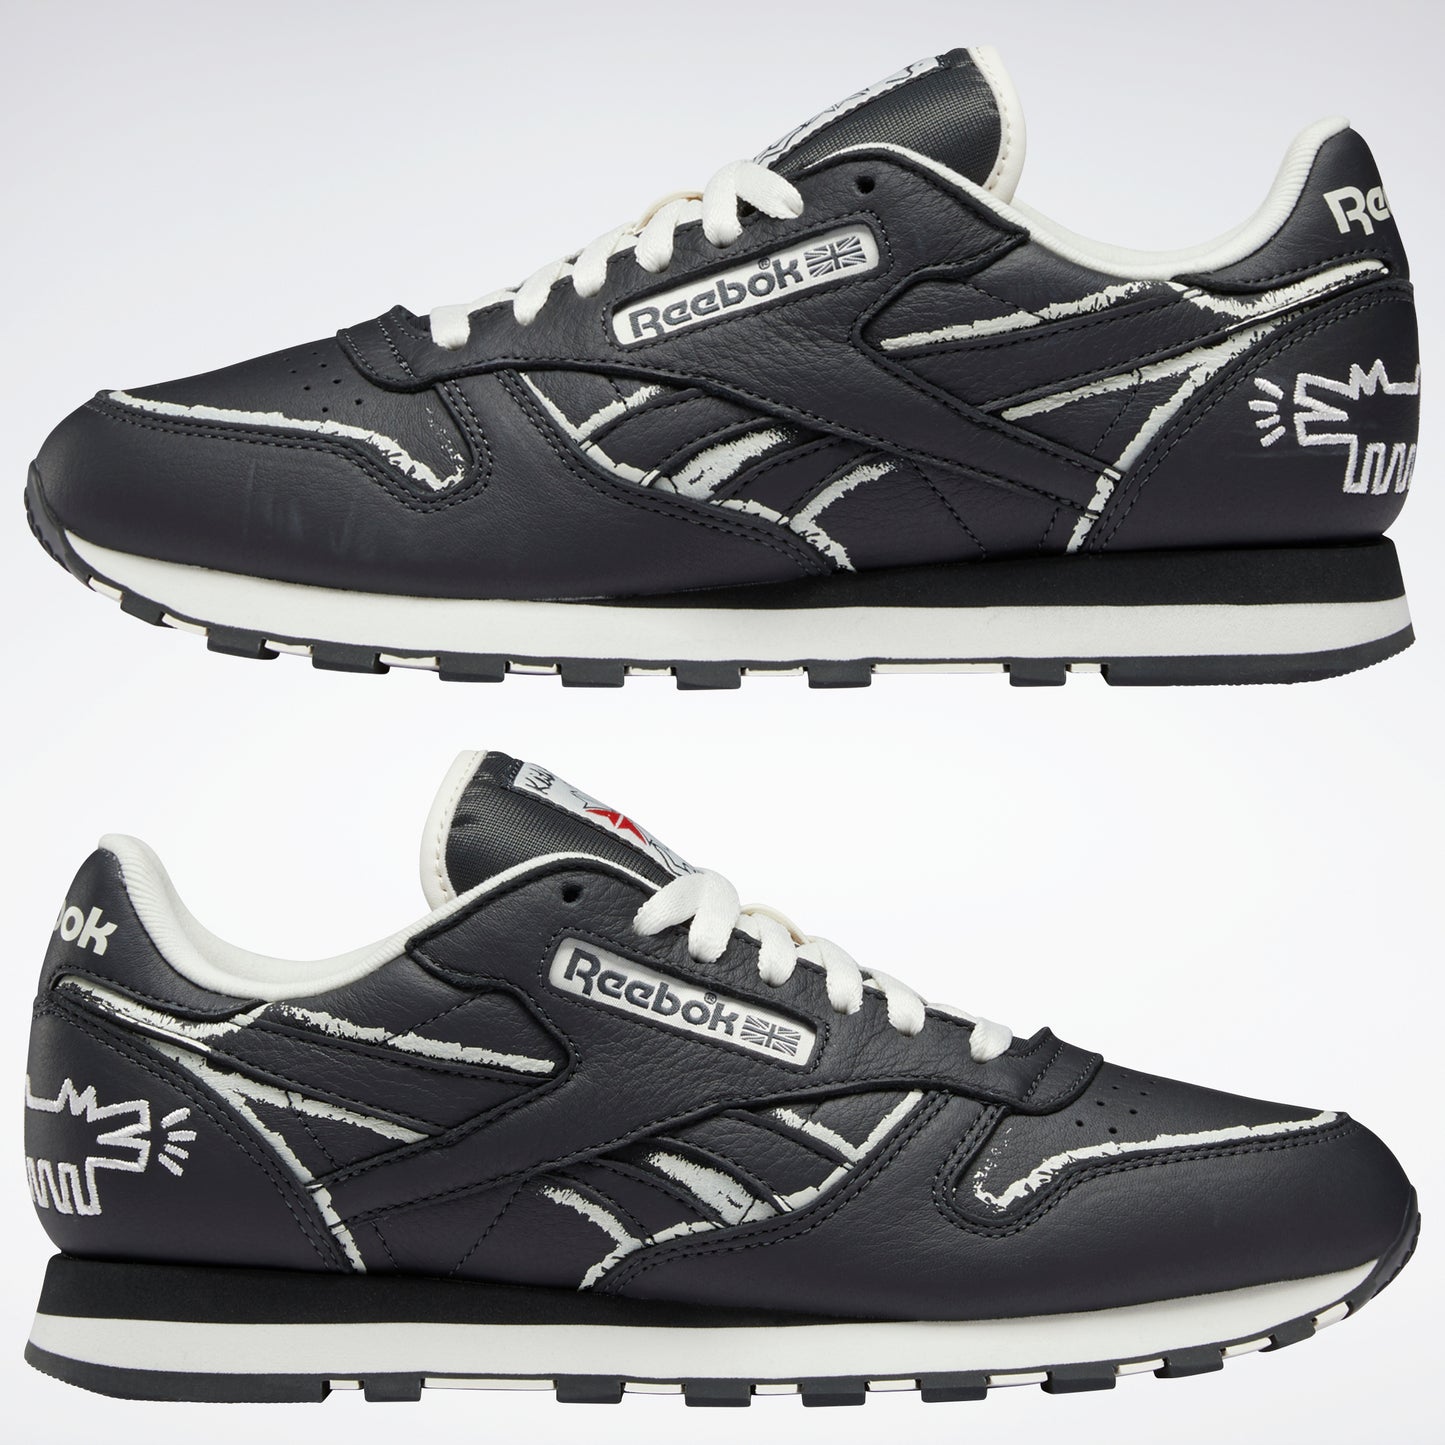 Reebok Footwear Men Keith Haring Classic Leather Shoes Purgry/Chalk/Purgry